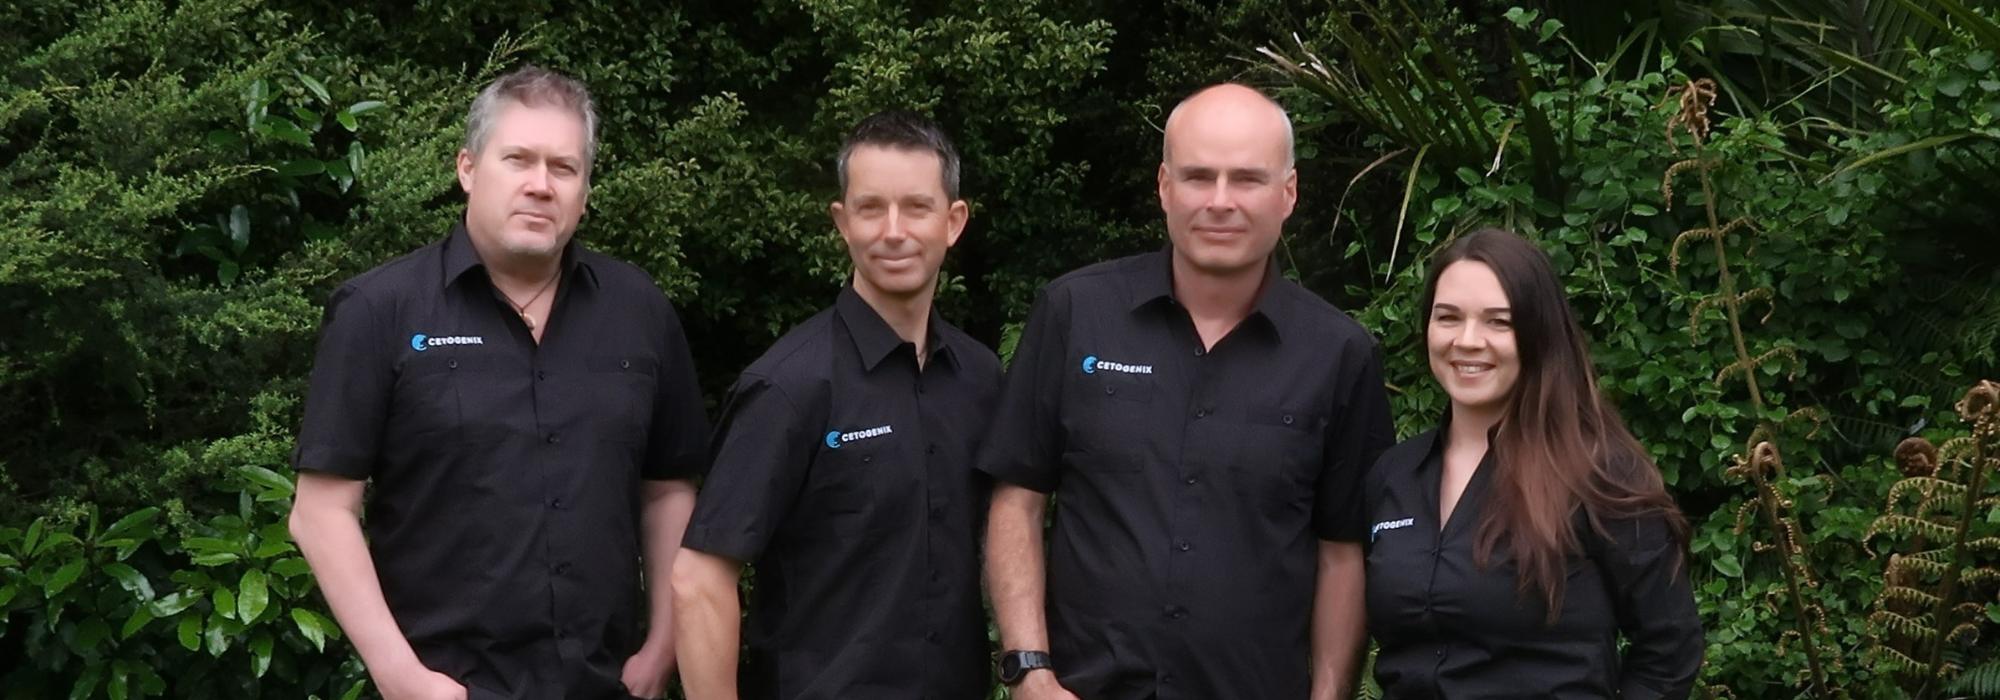 Seed funding means growth for Rotorua cleantech company